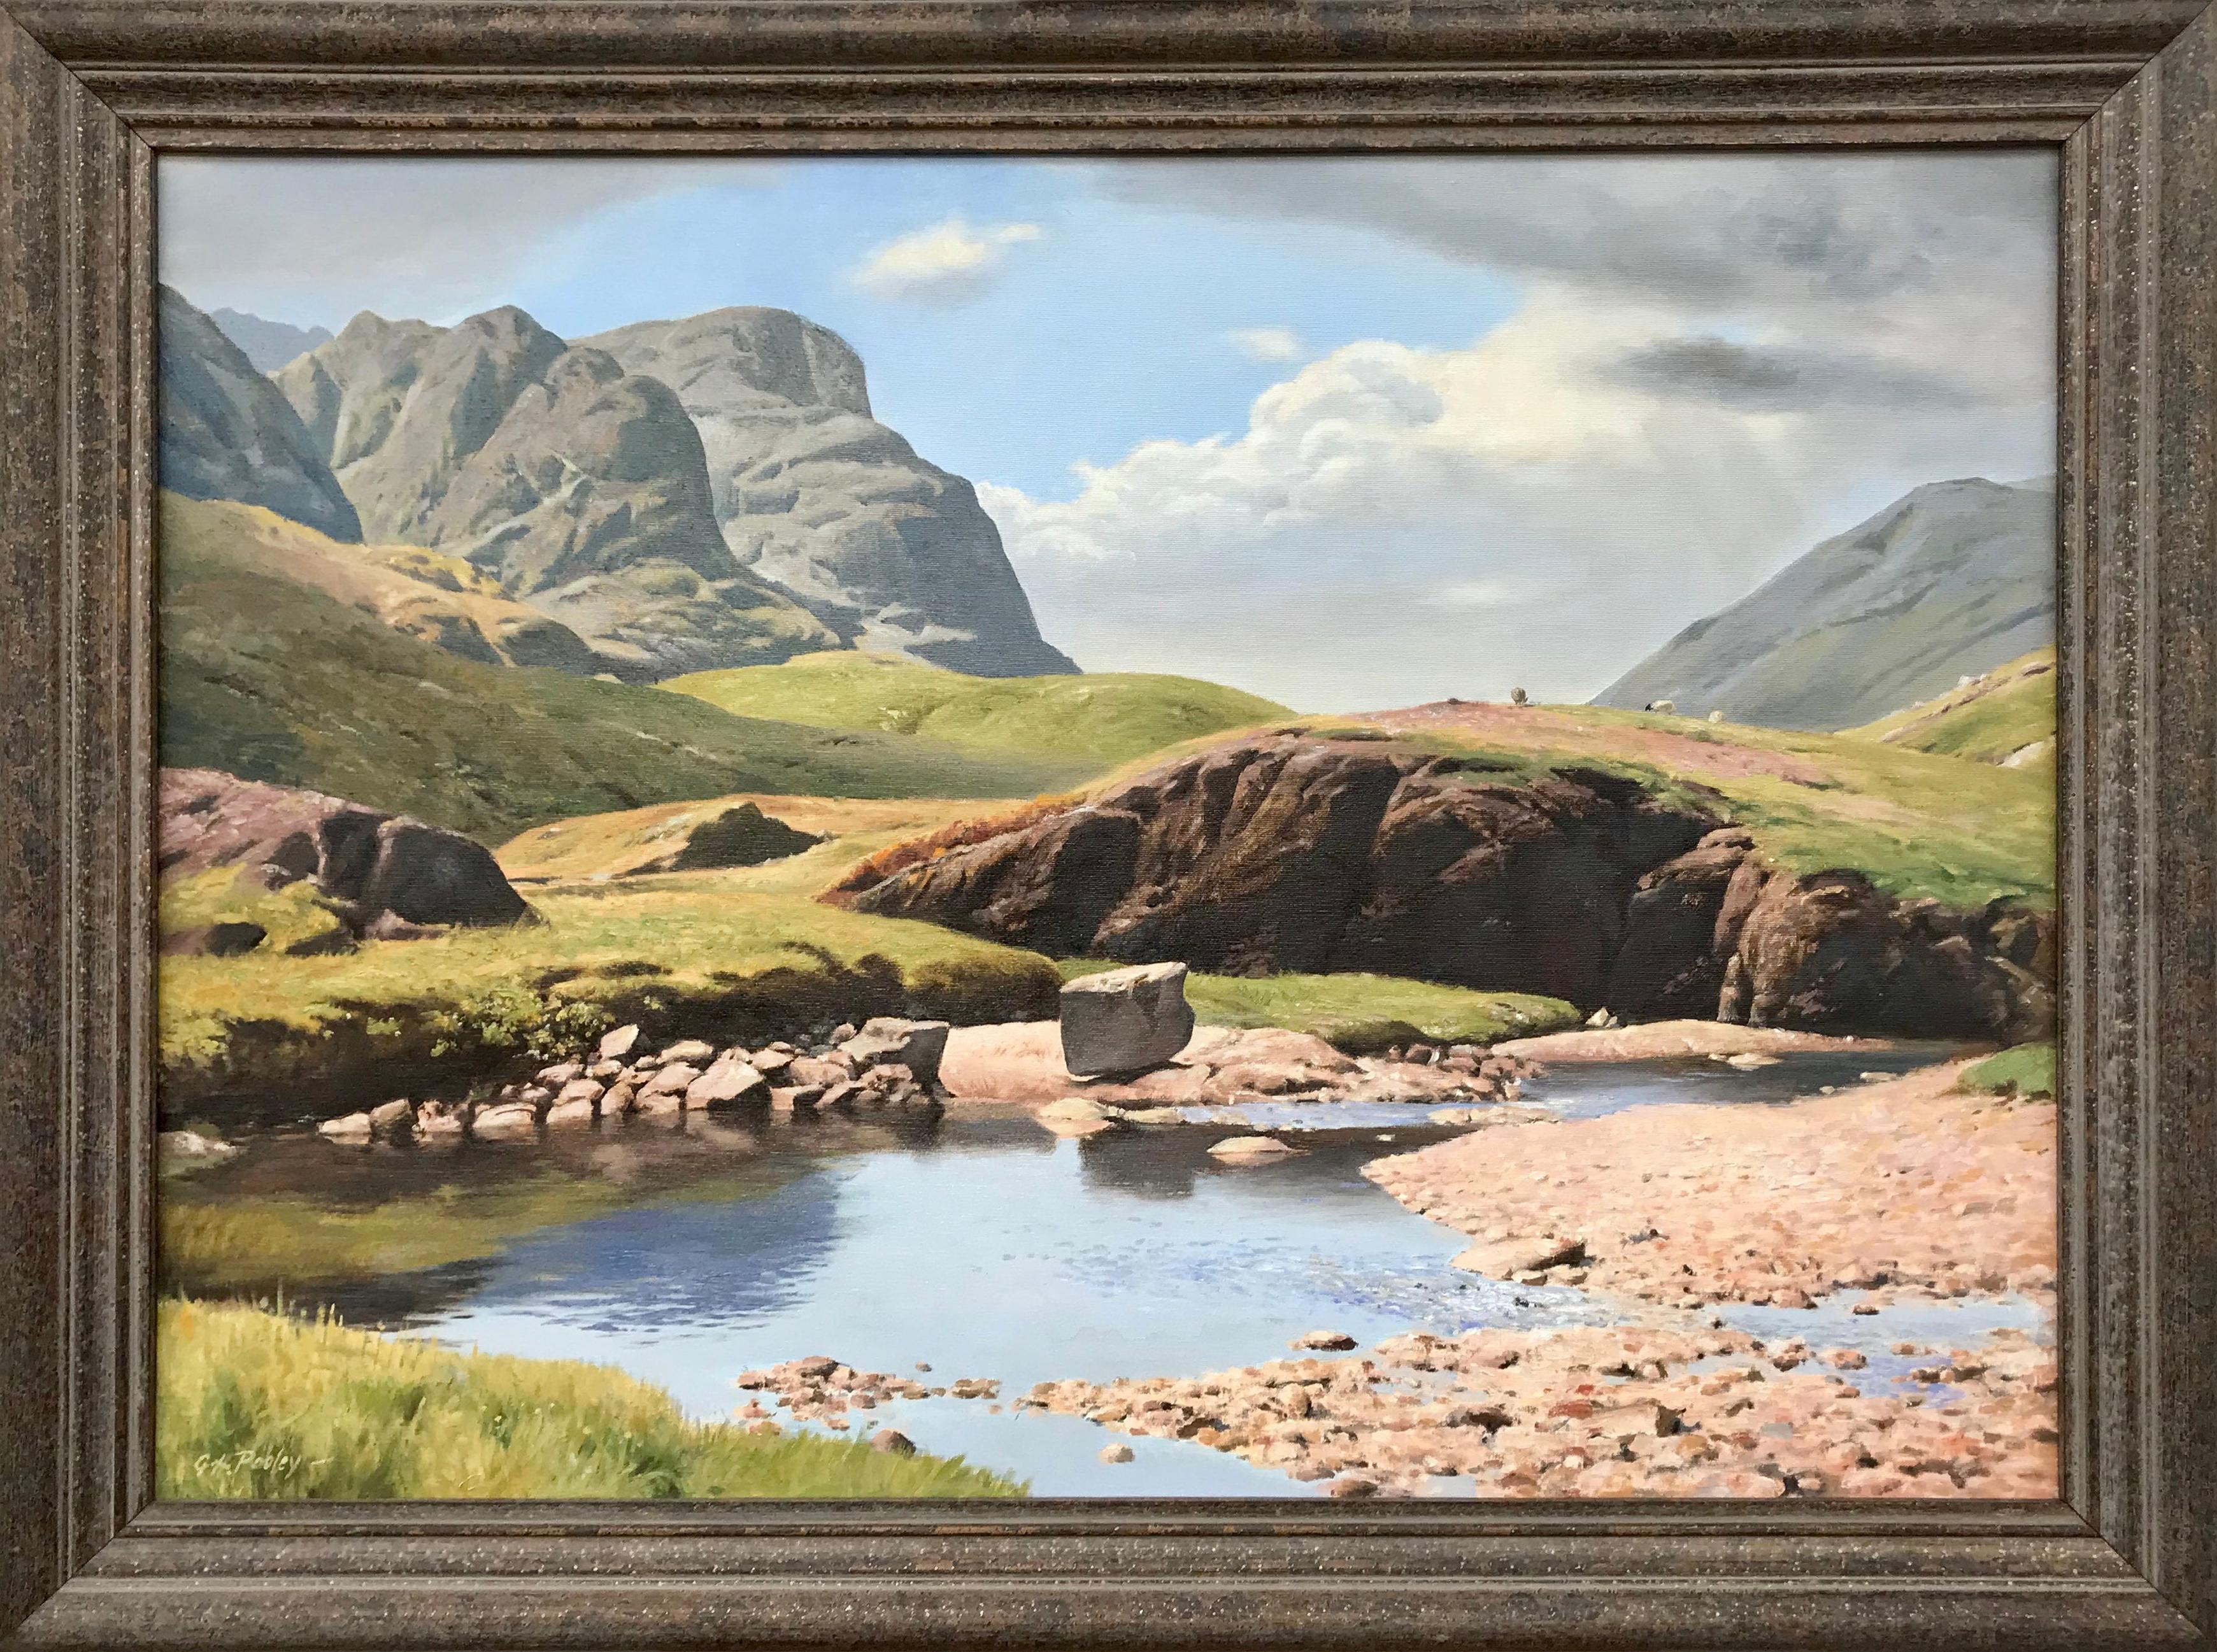 Geoffrey H Pooley Figurative Painting - Large Realist River Mountain Landscape Oil Painting in English Lake District UK